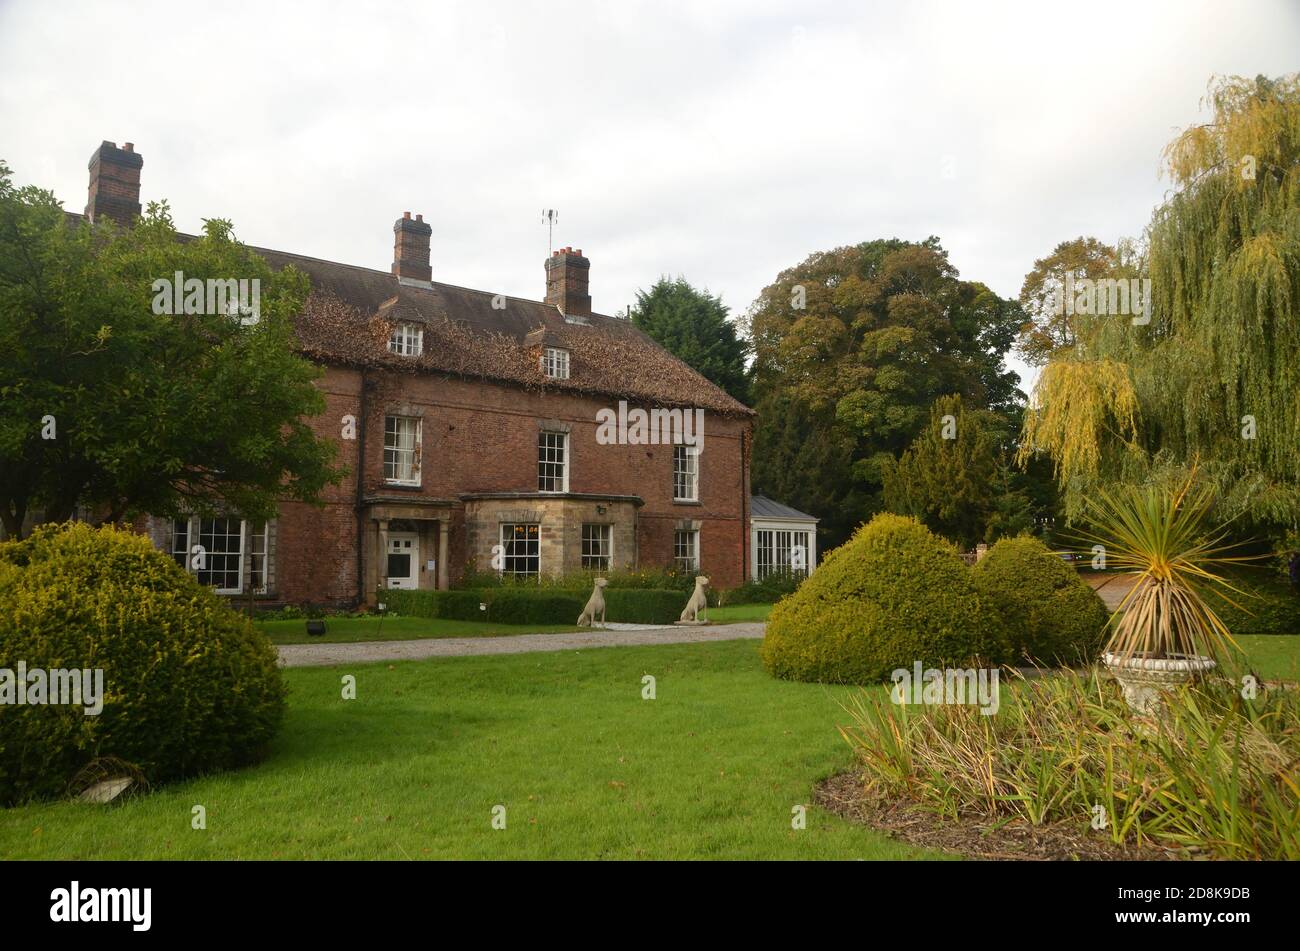 The east face of the manor house at Risley, Derbyshire, UK. Once the home of explorer Sir Hugh Willoughby. Now a hotel; the Risley Hall Hotel (2020). Stock Photo